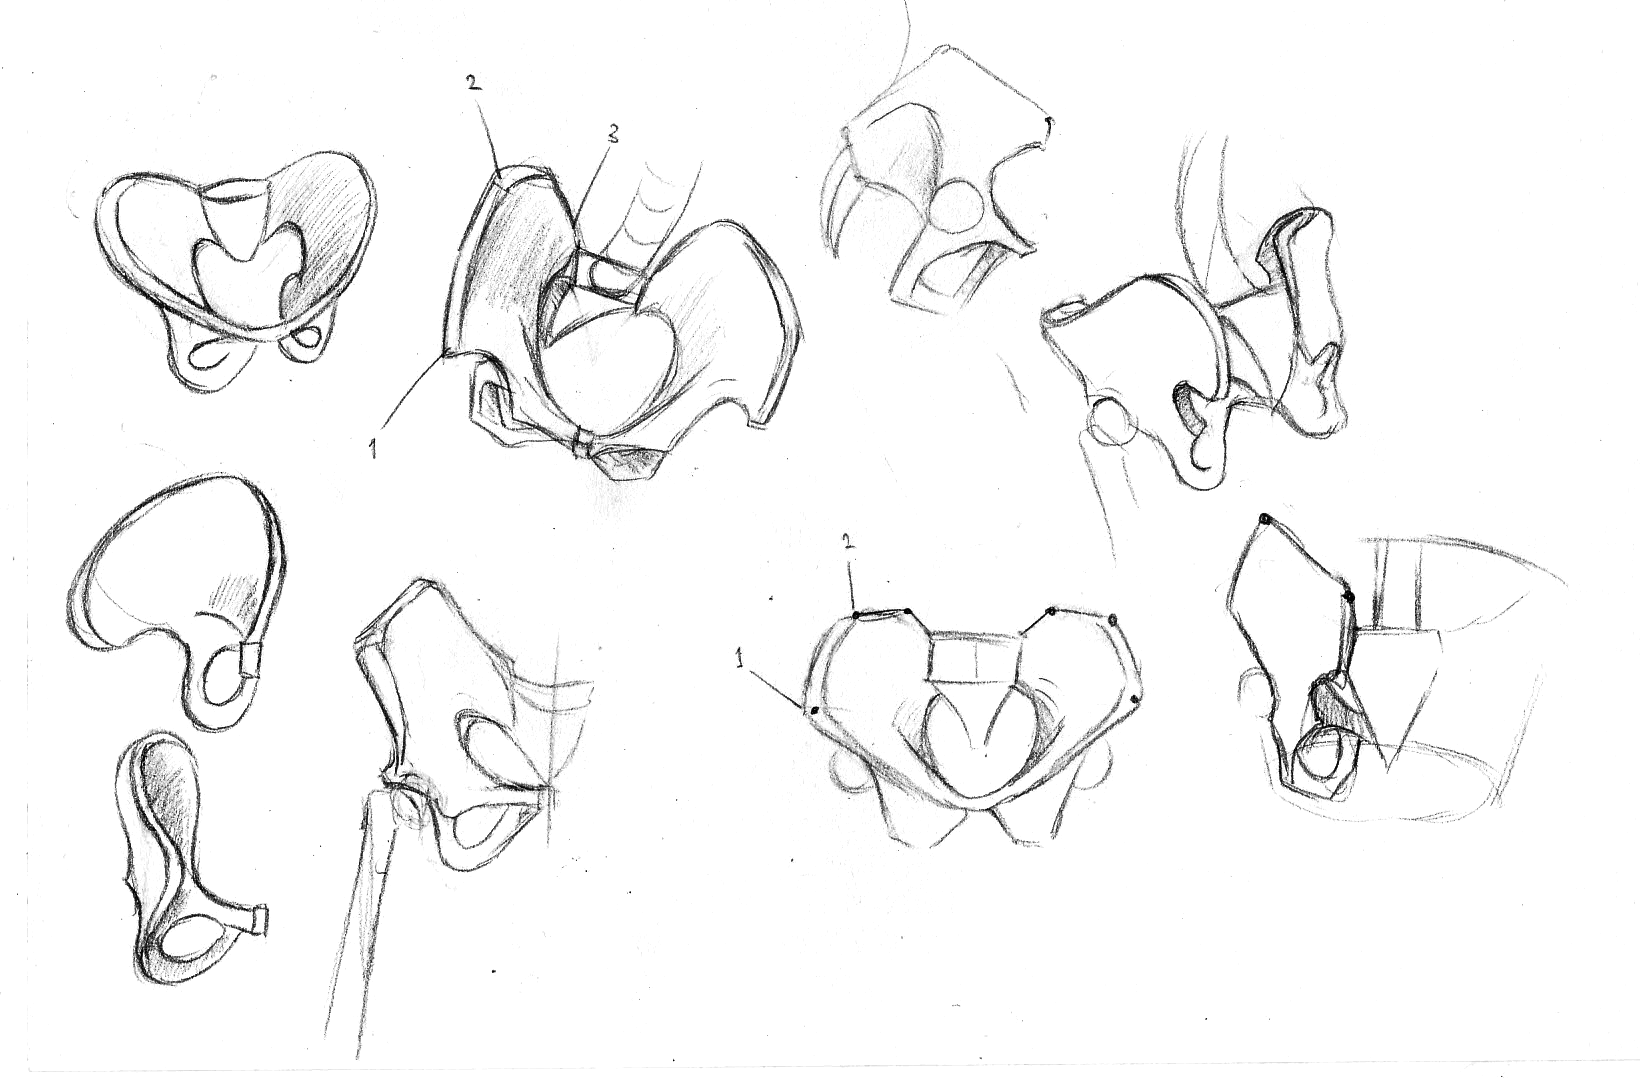 start drawing the pelvic area first for a croquis.